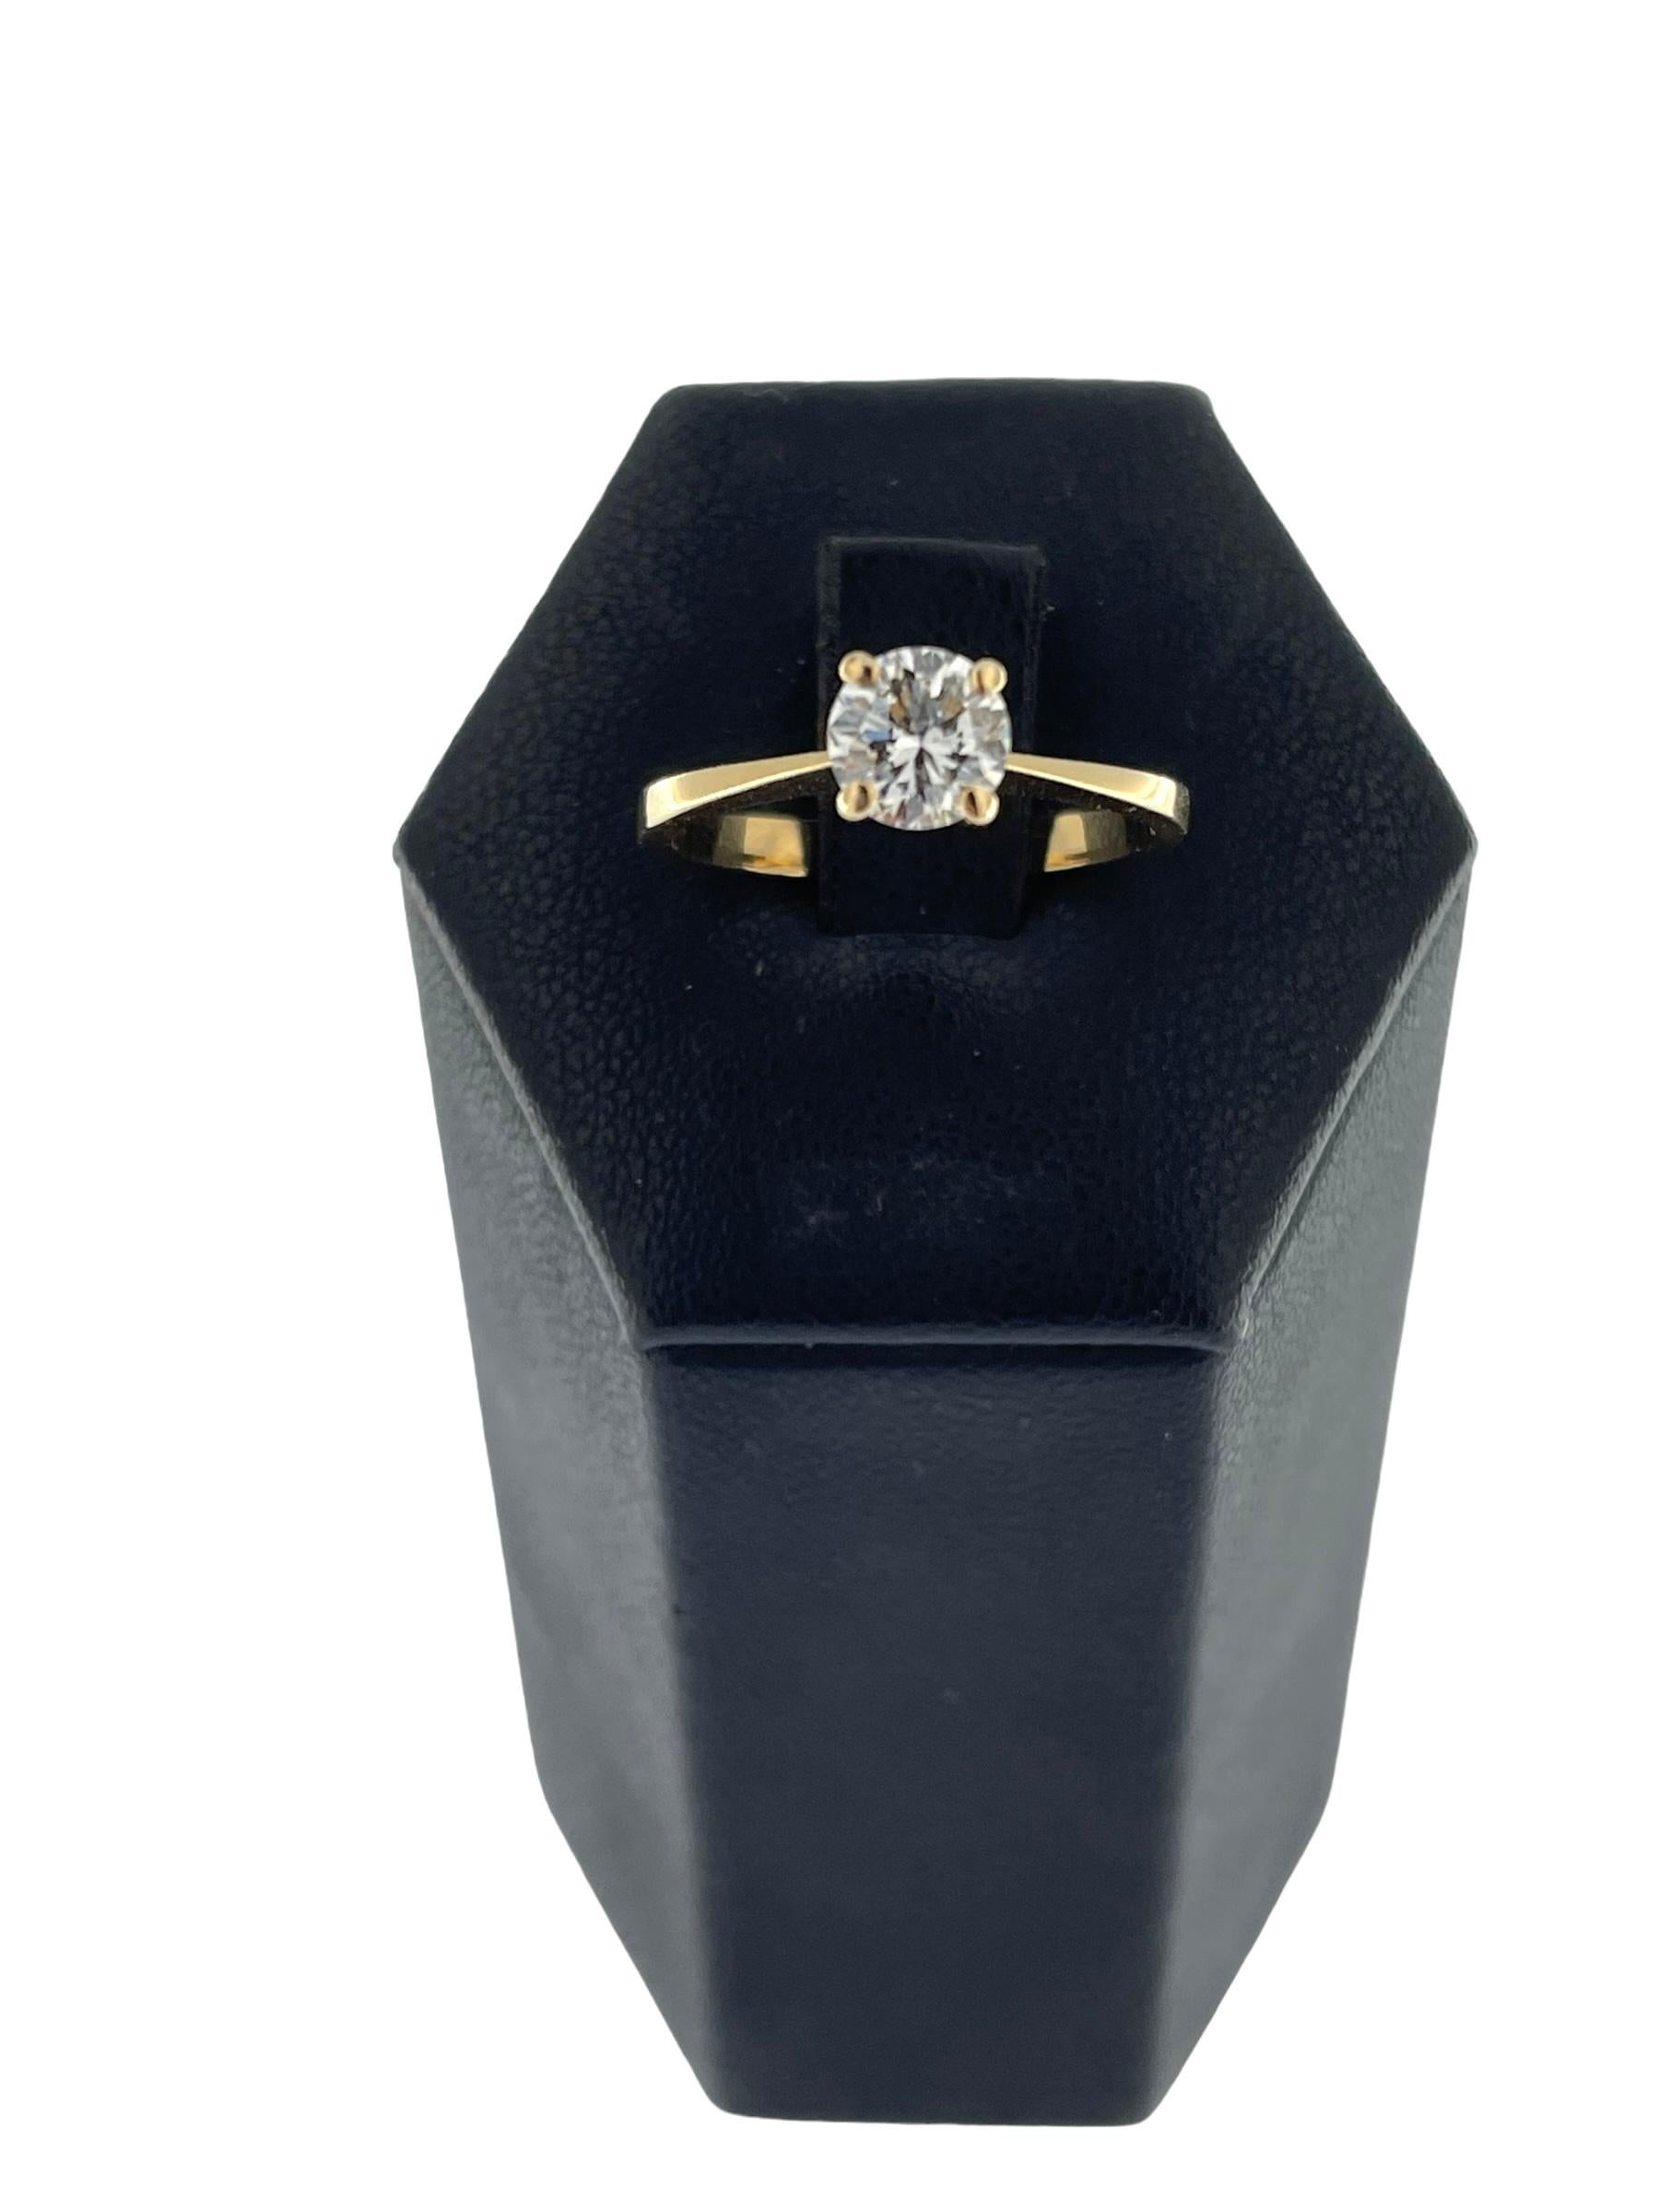 Brilliant Cut HRD Certified Yellow Gold Solitaire Ring For Sale